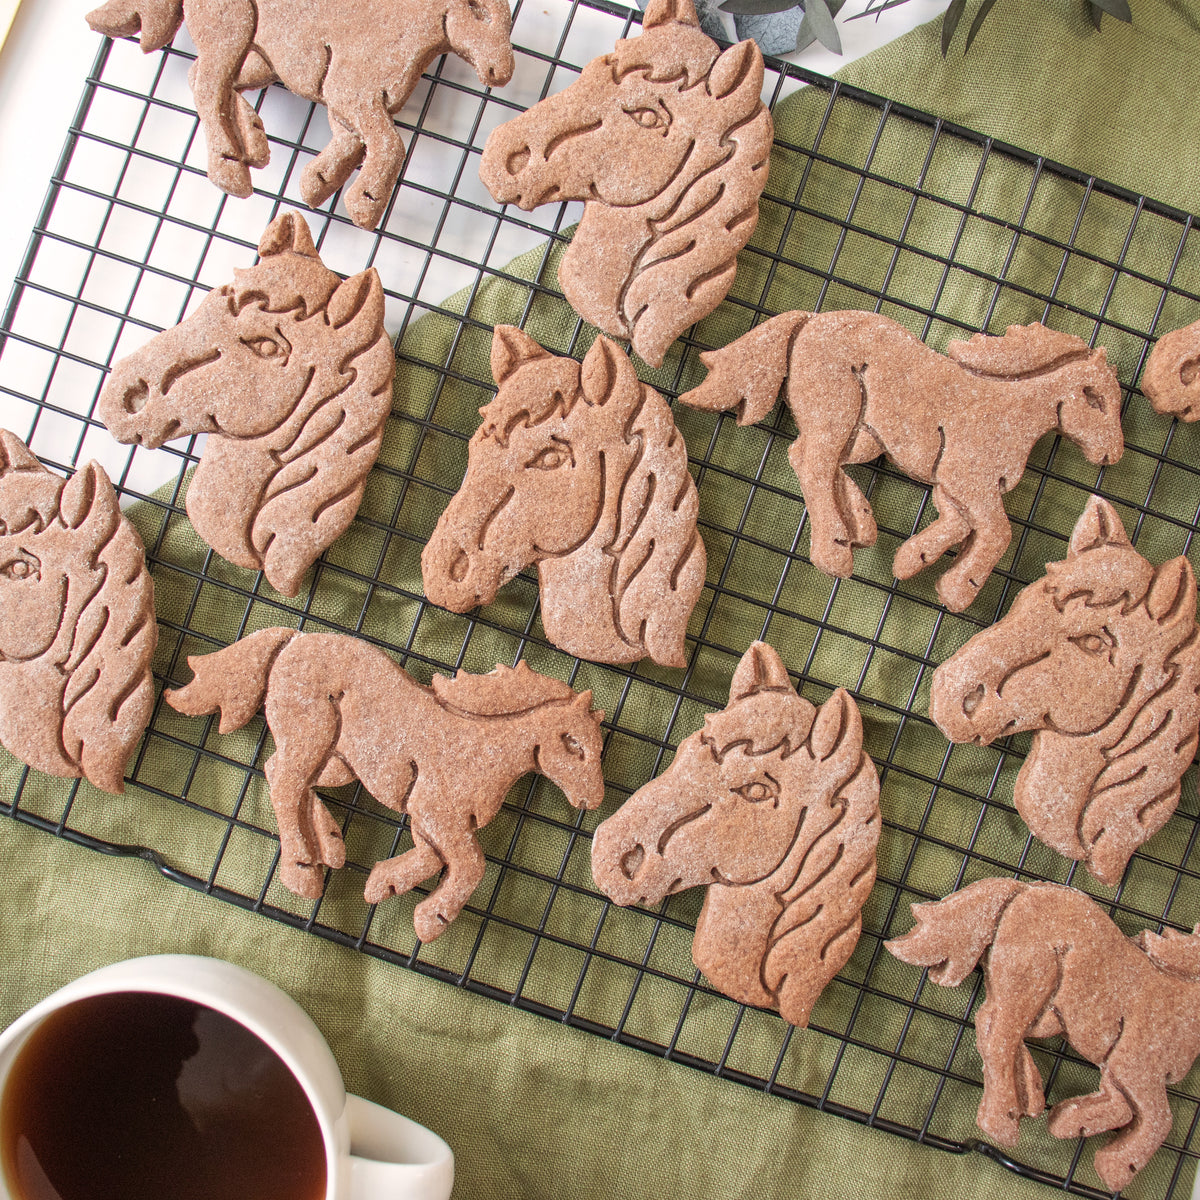 horse head and horse running cookies